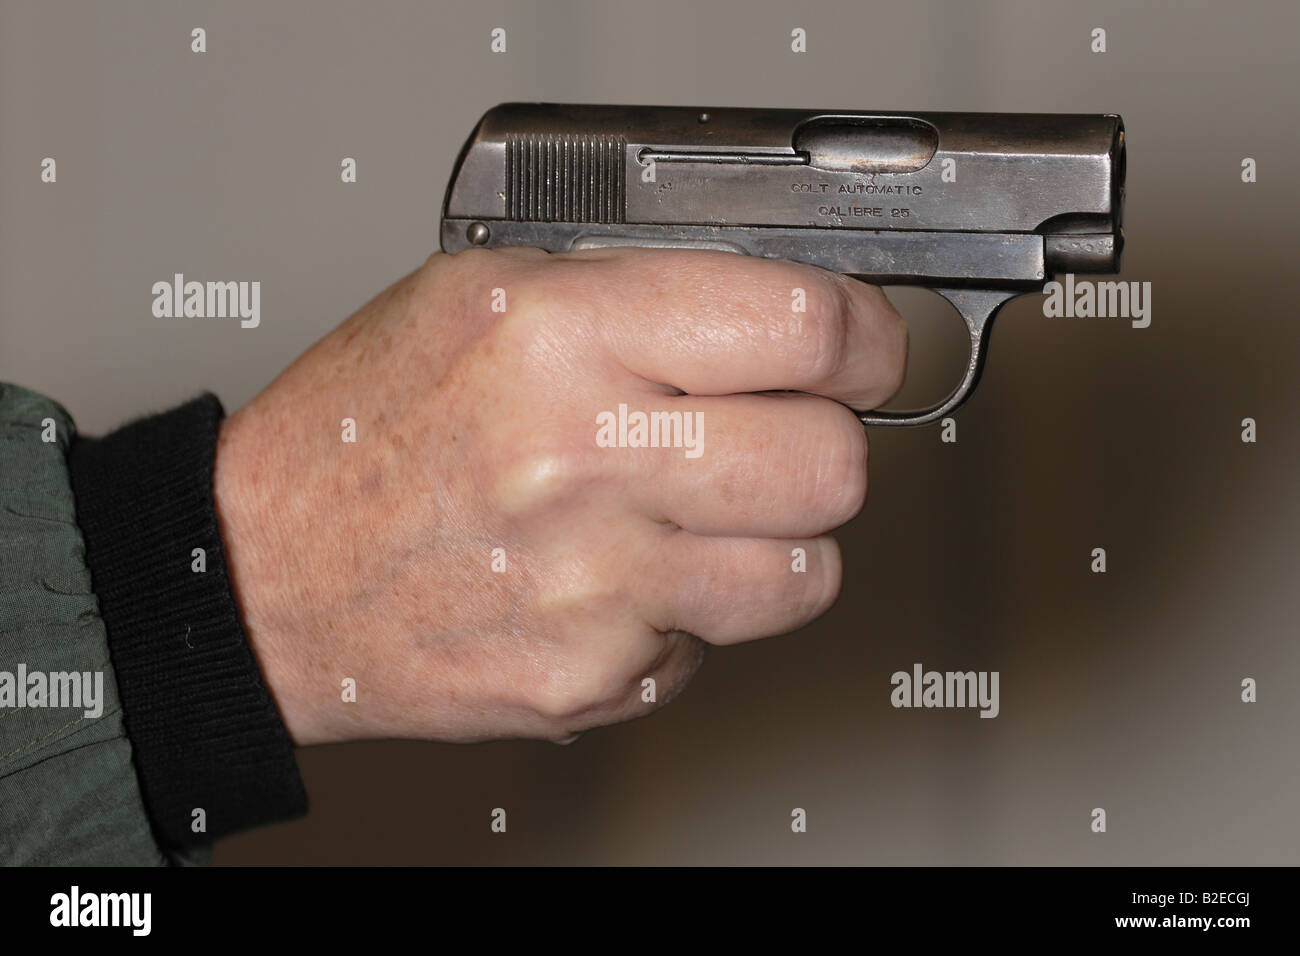 a small pistol held in hand and pointed or aimed Stock Photo